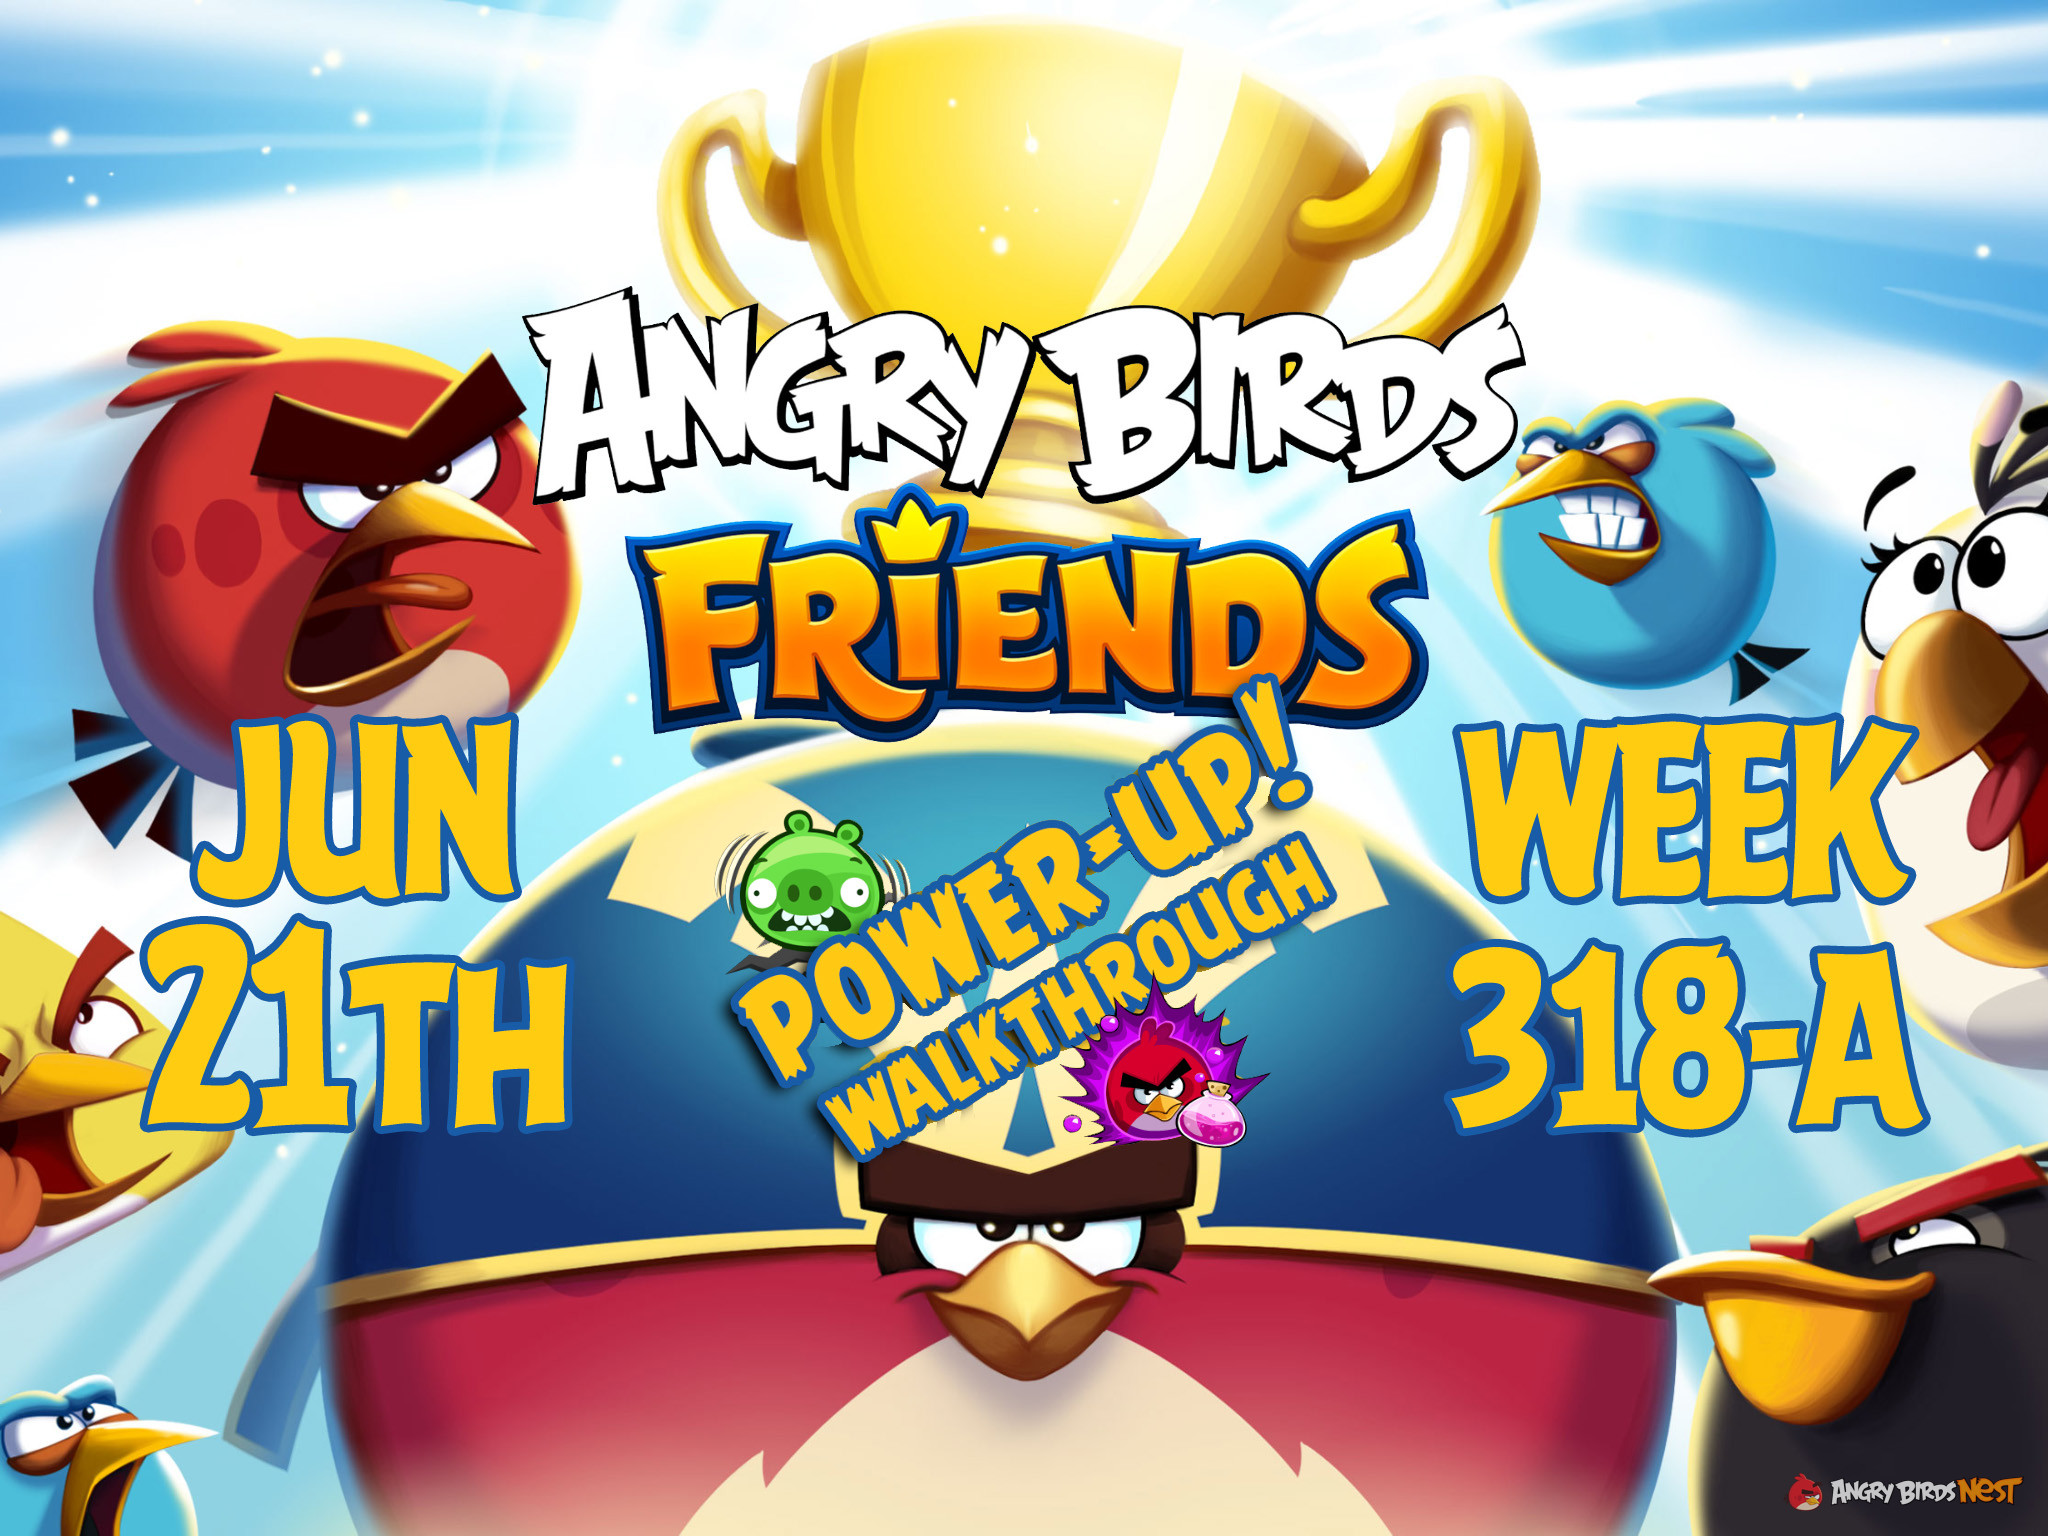 Angry-Birds-Friends-Tournament-Week-318-A-Feature-Image-PU